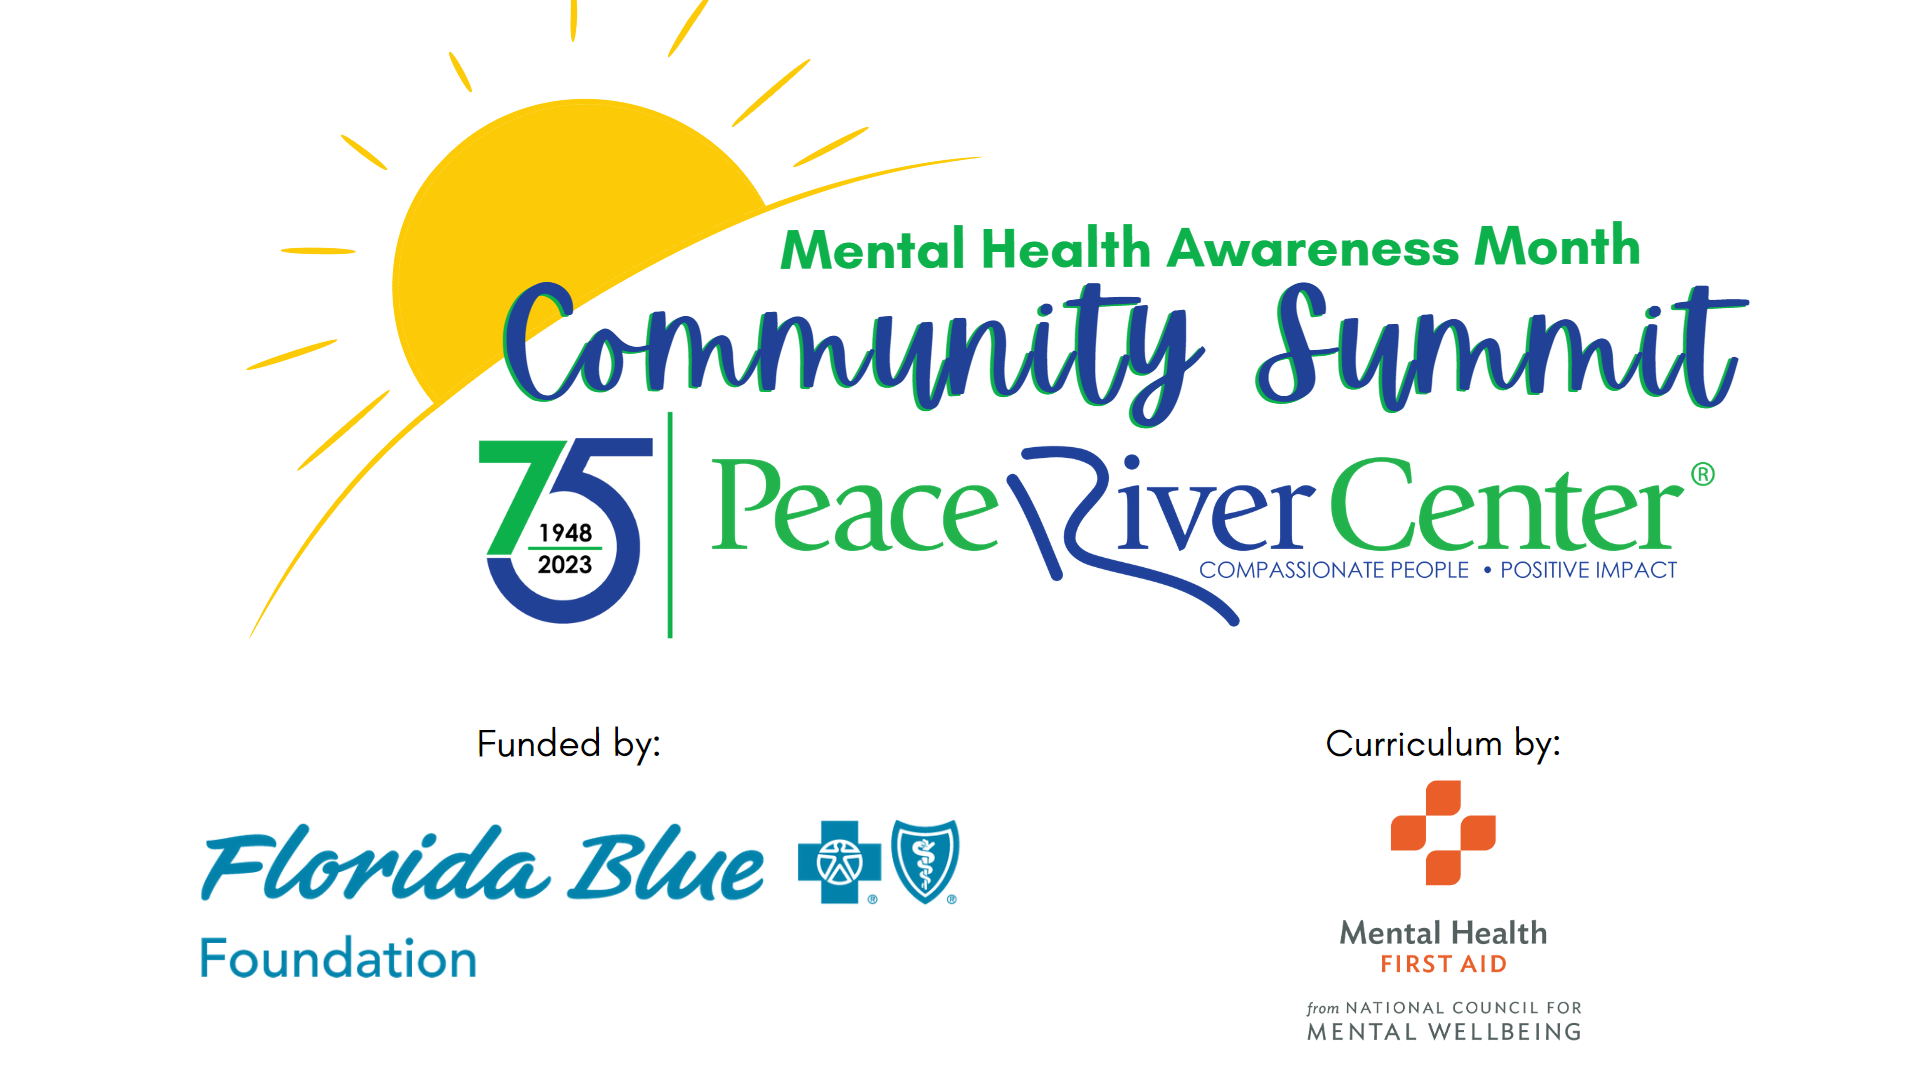 Mental Health Awareness Month Community Summit on May 19